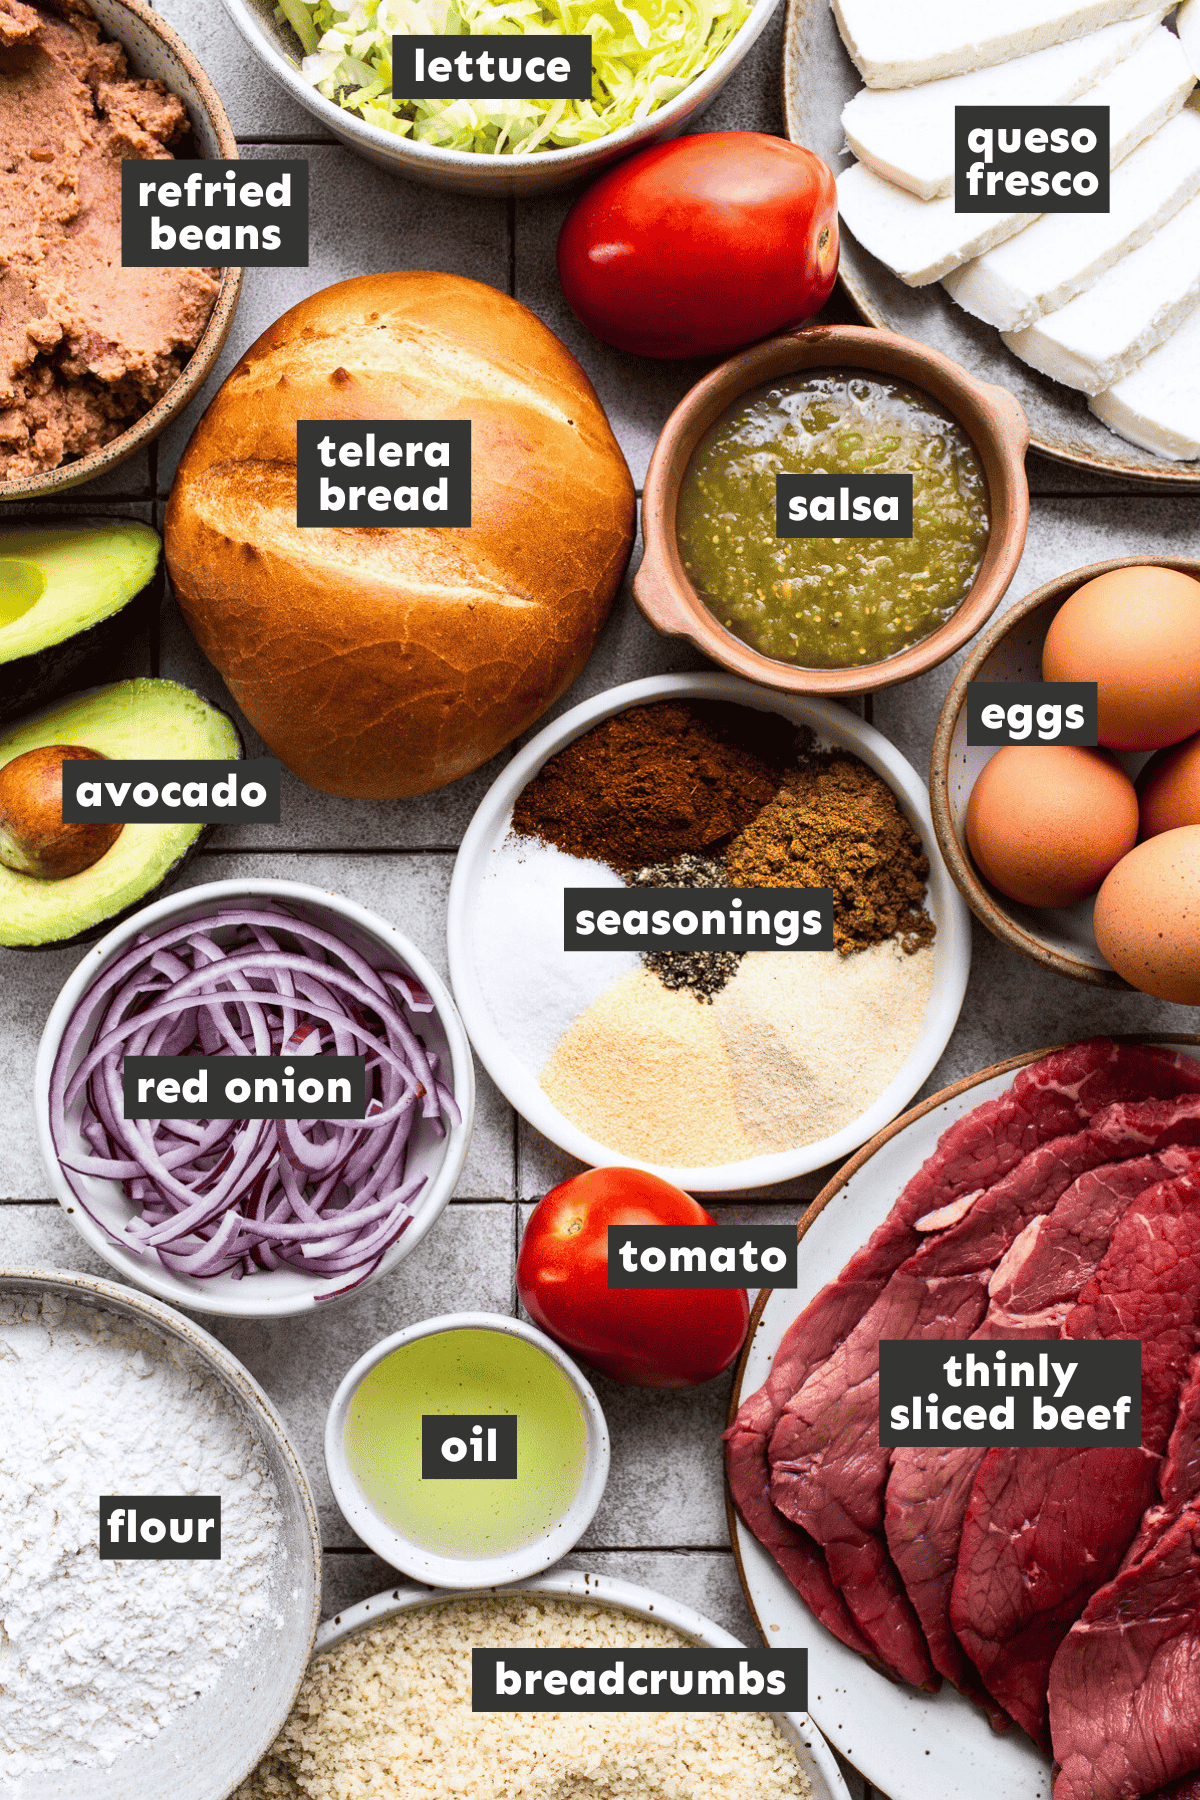 Ingredients for Torta de Milanesa on a table.